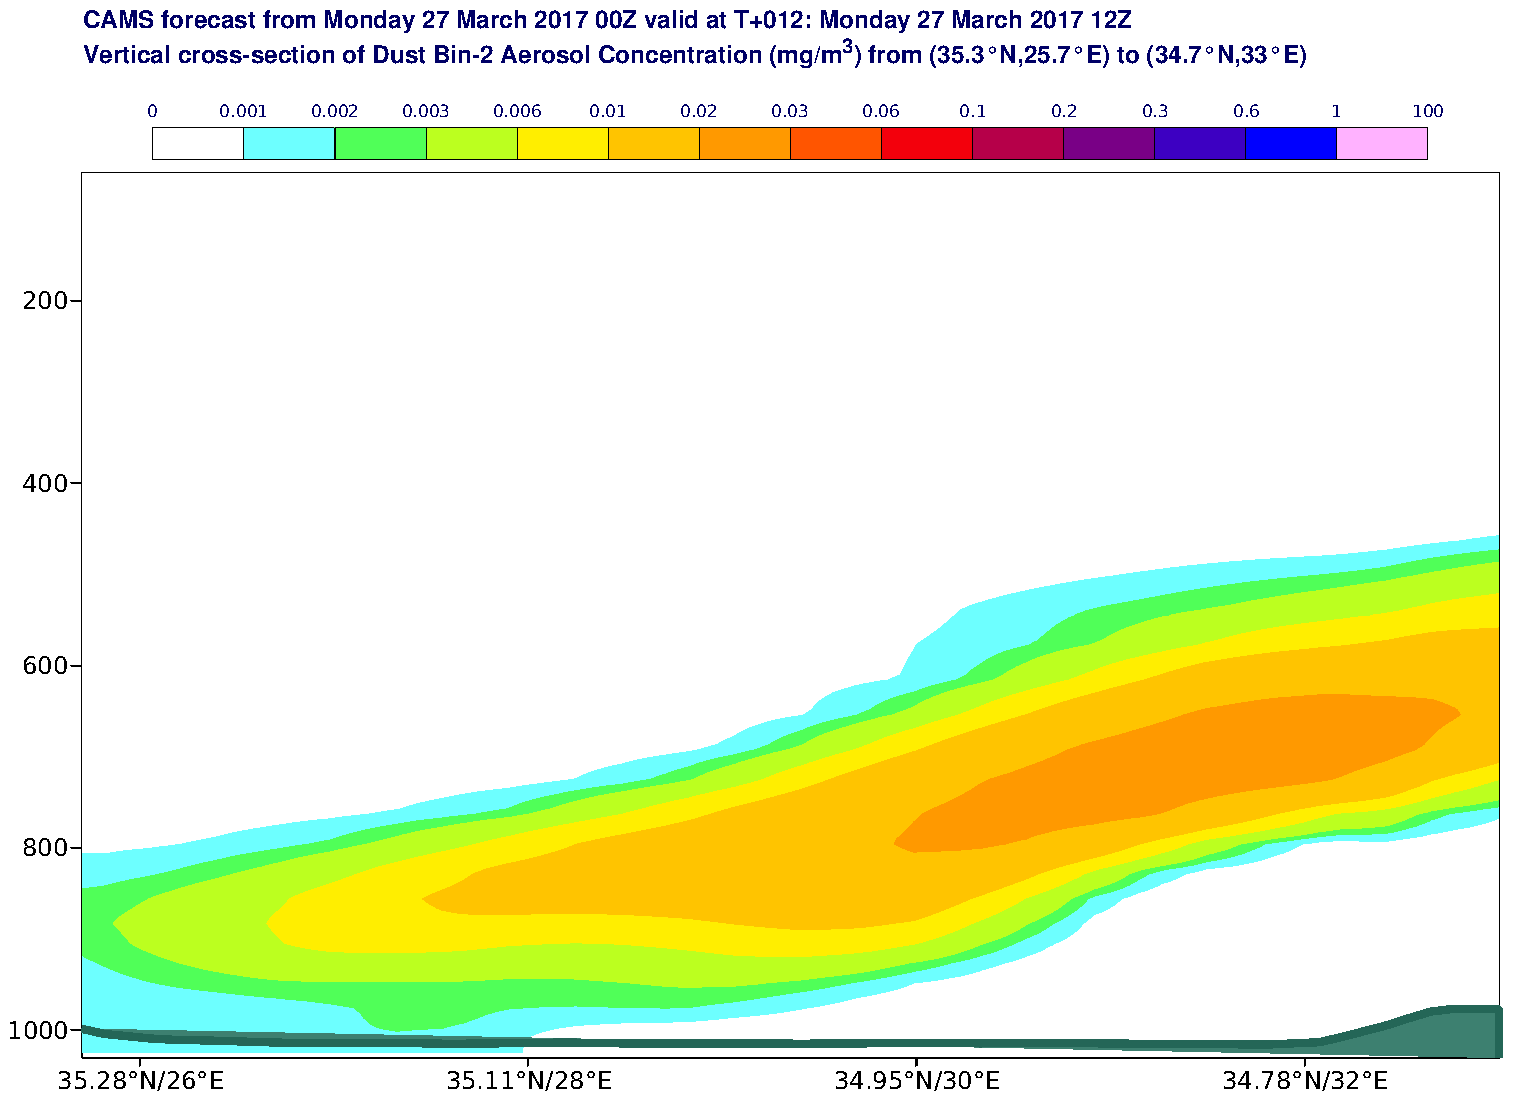 Vertical cross-section of Dust Bin-2 Aerosol Concentration (mg/m3) valid at T12 - 2017-03-27 12:00